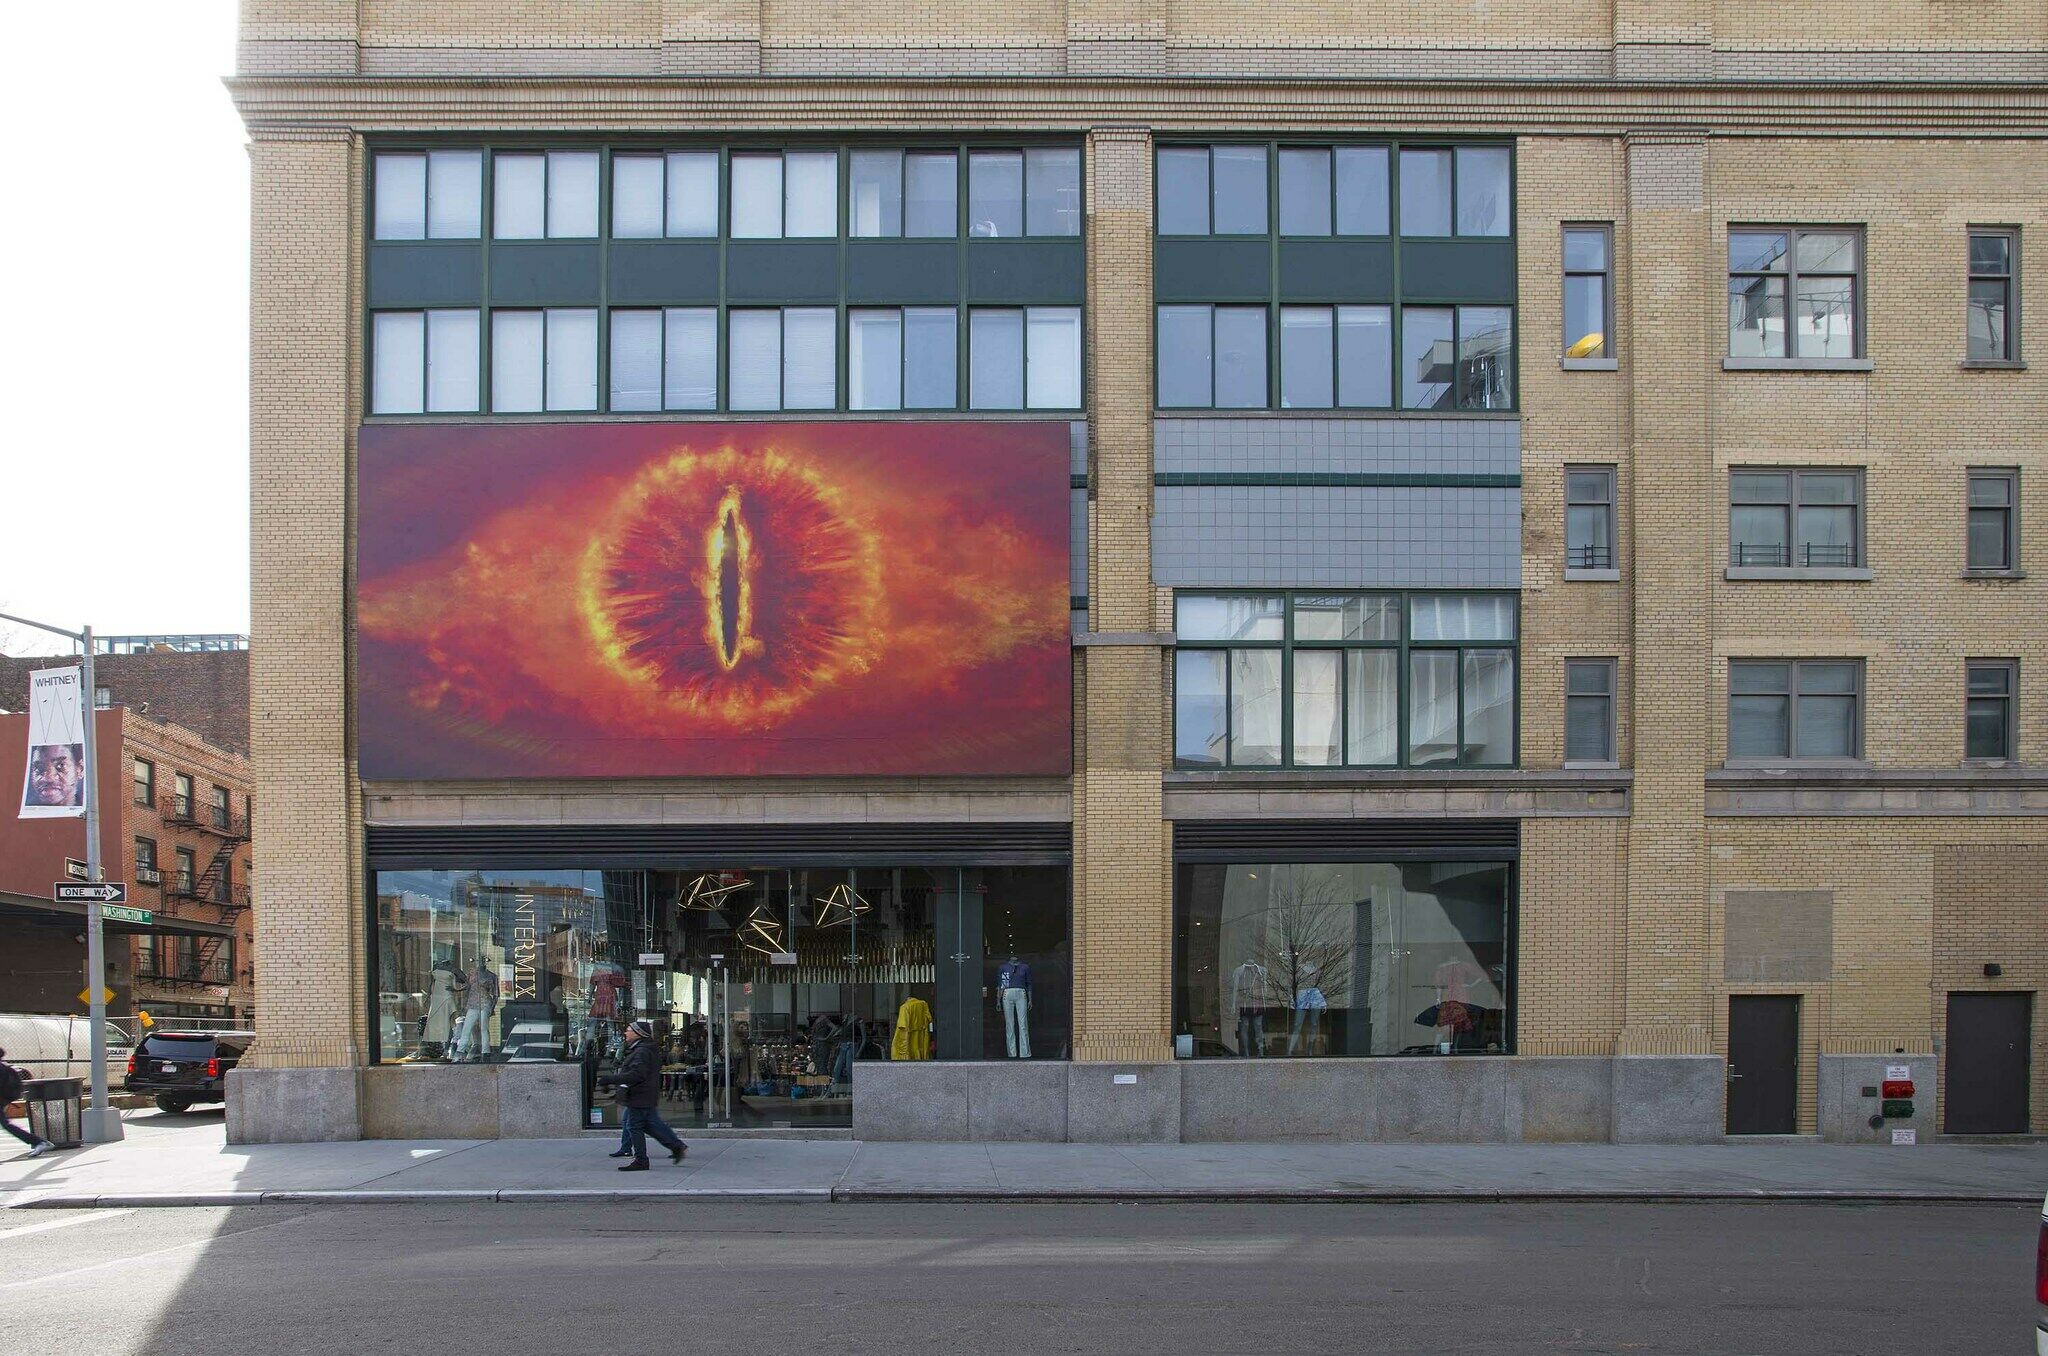 A work of art displayed on the outside of a building.